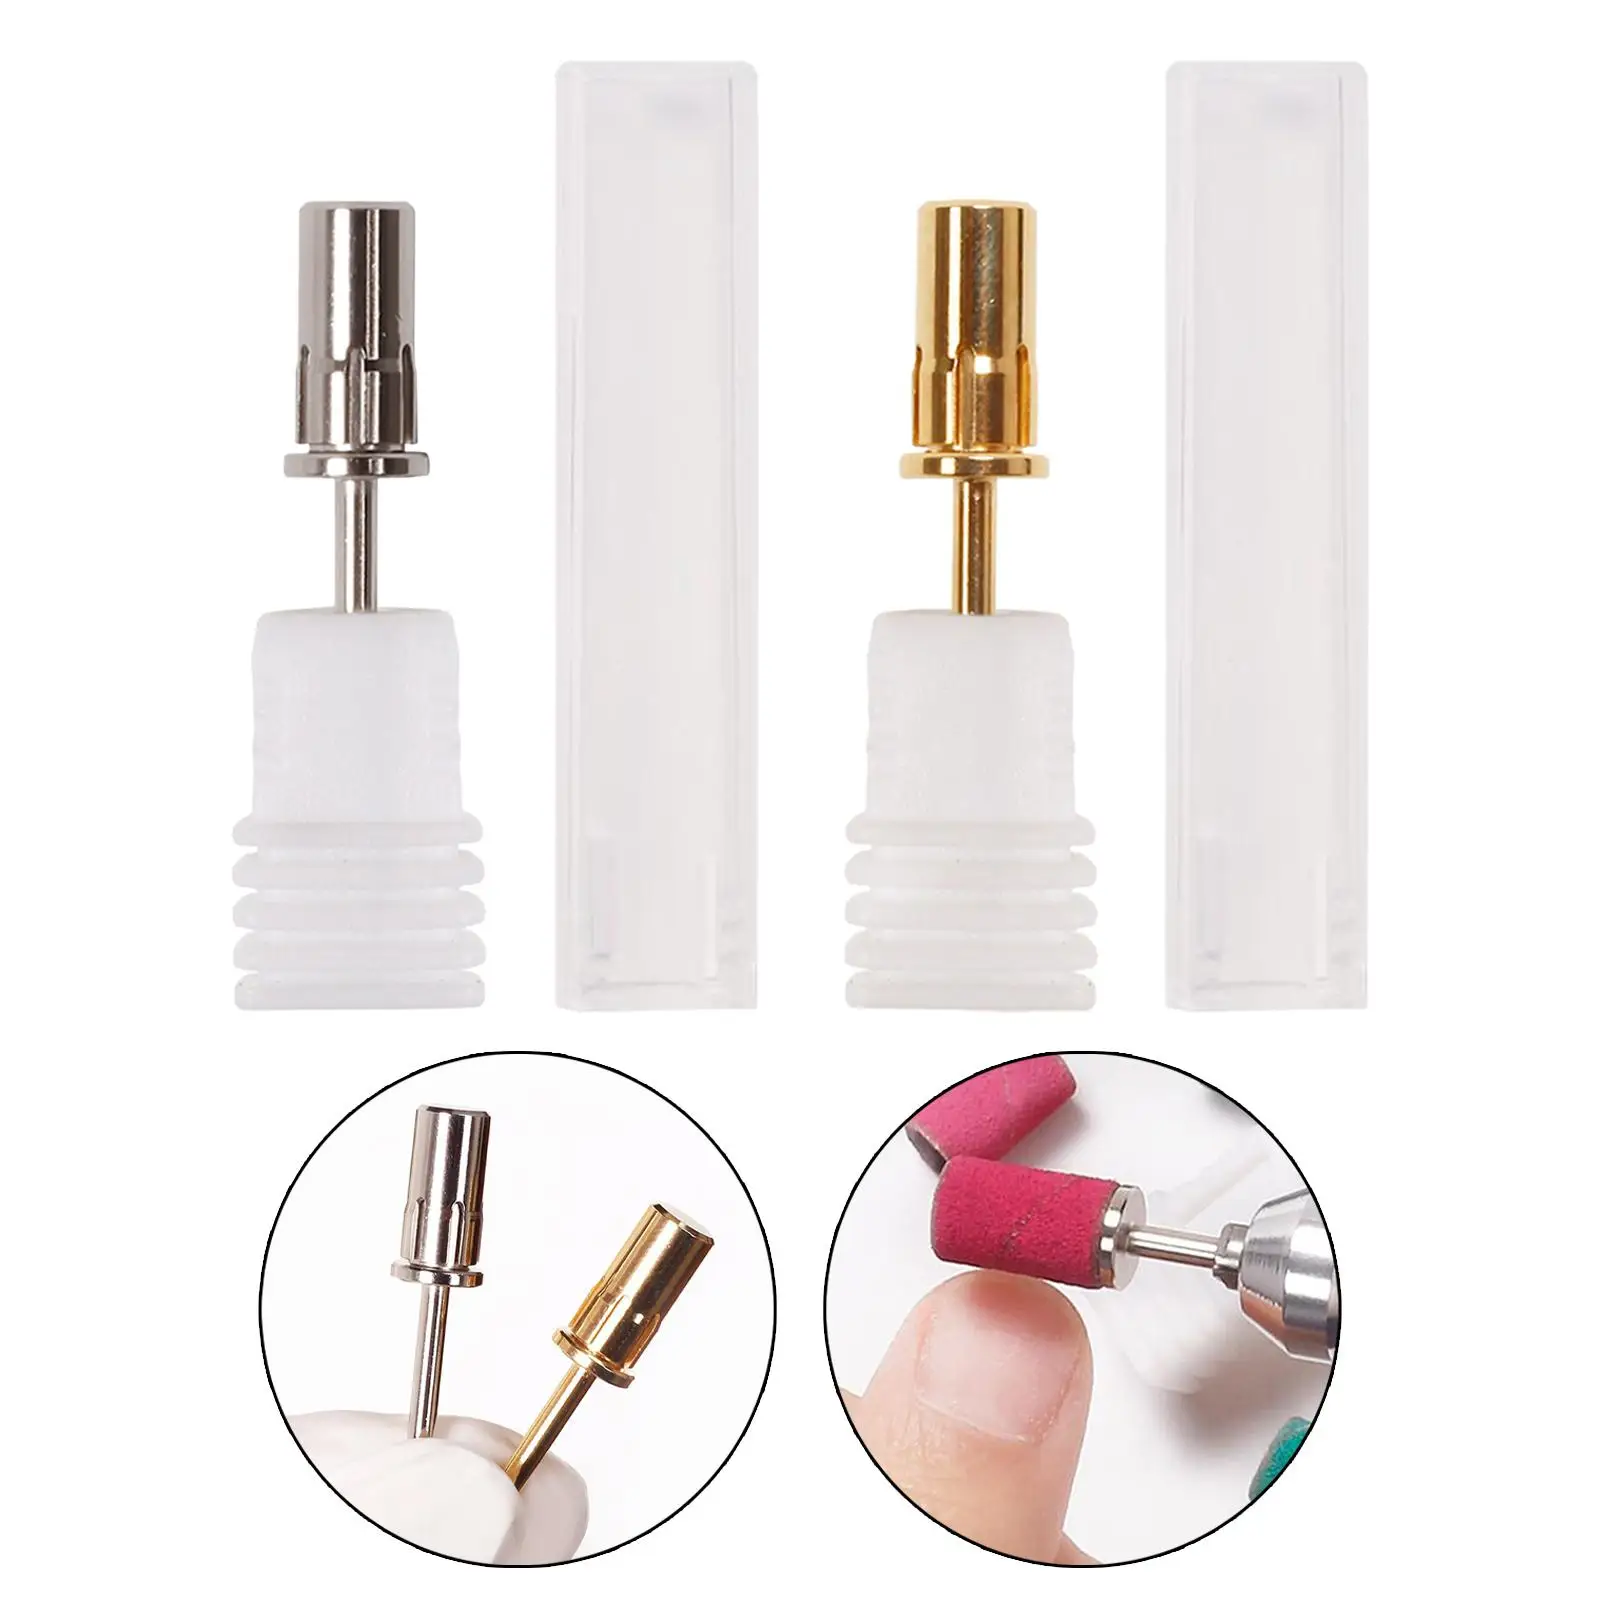 Nail Drill Bit Manicure Pedicure Tool Stainless Steel Shaft Nail Drill Bits for Sanding Band and Manicure Electric Nail File